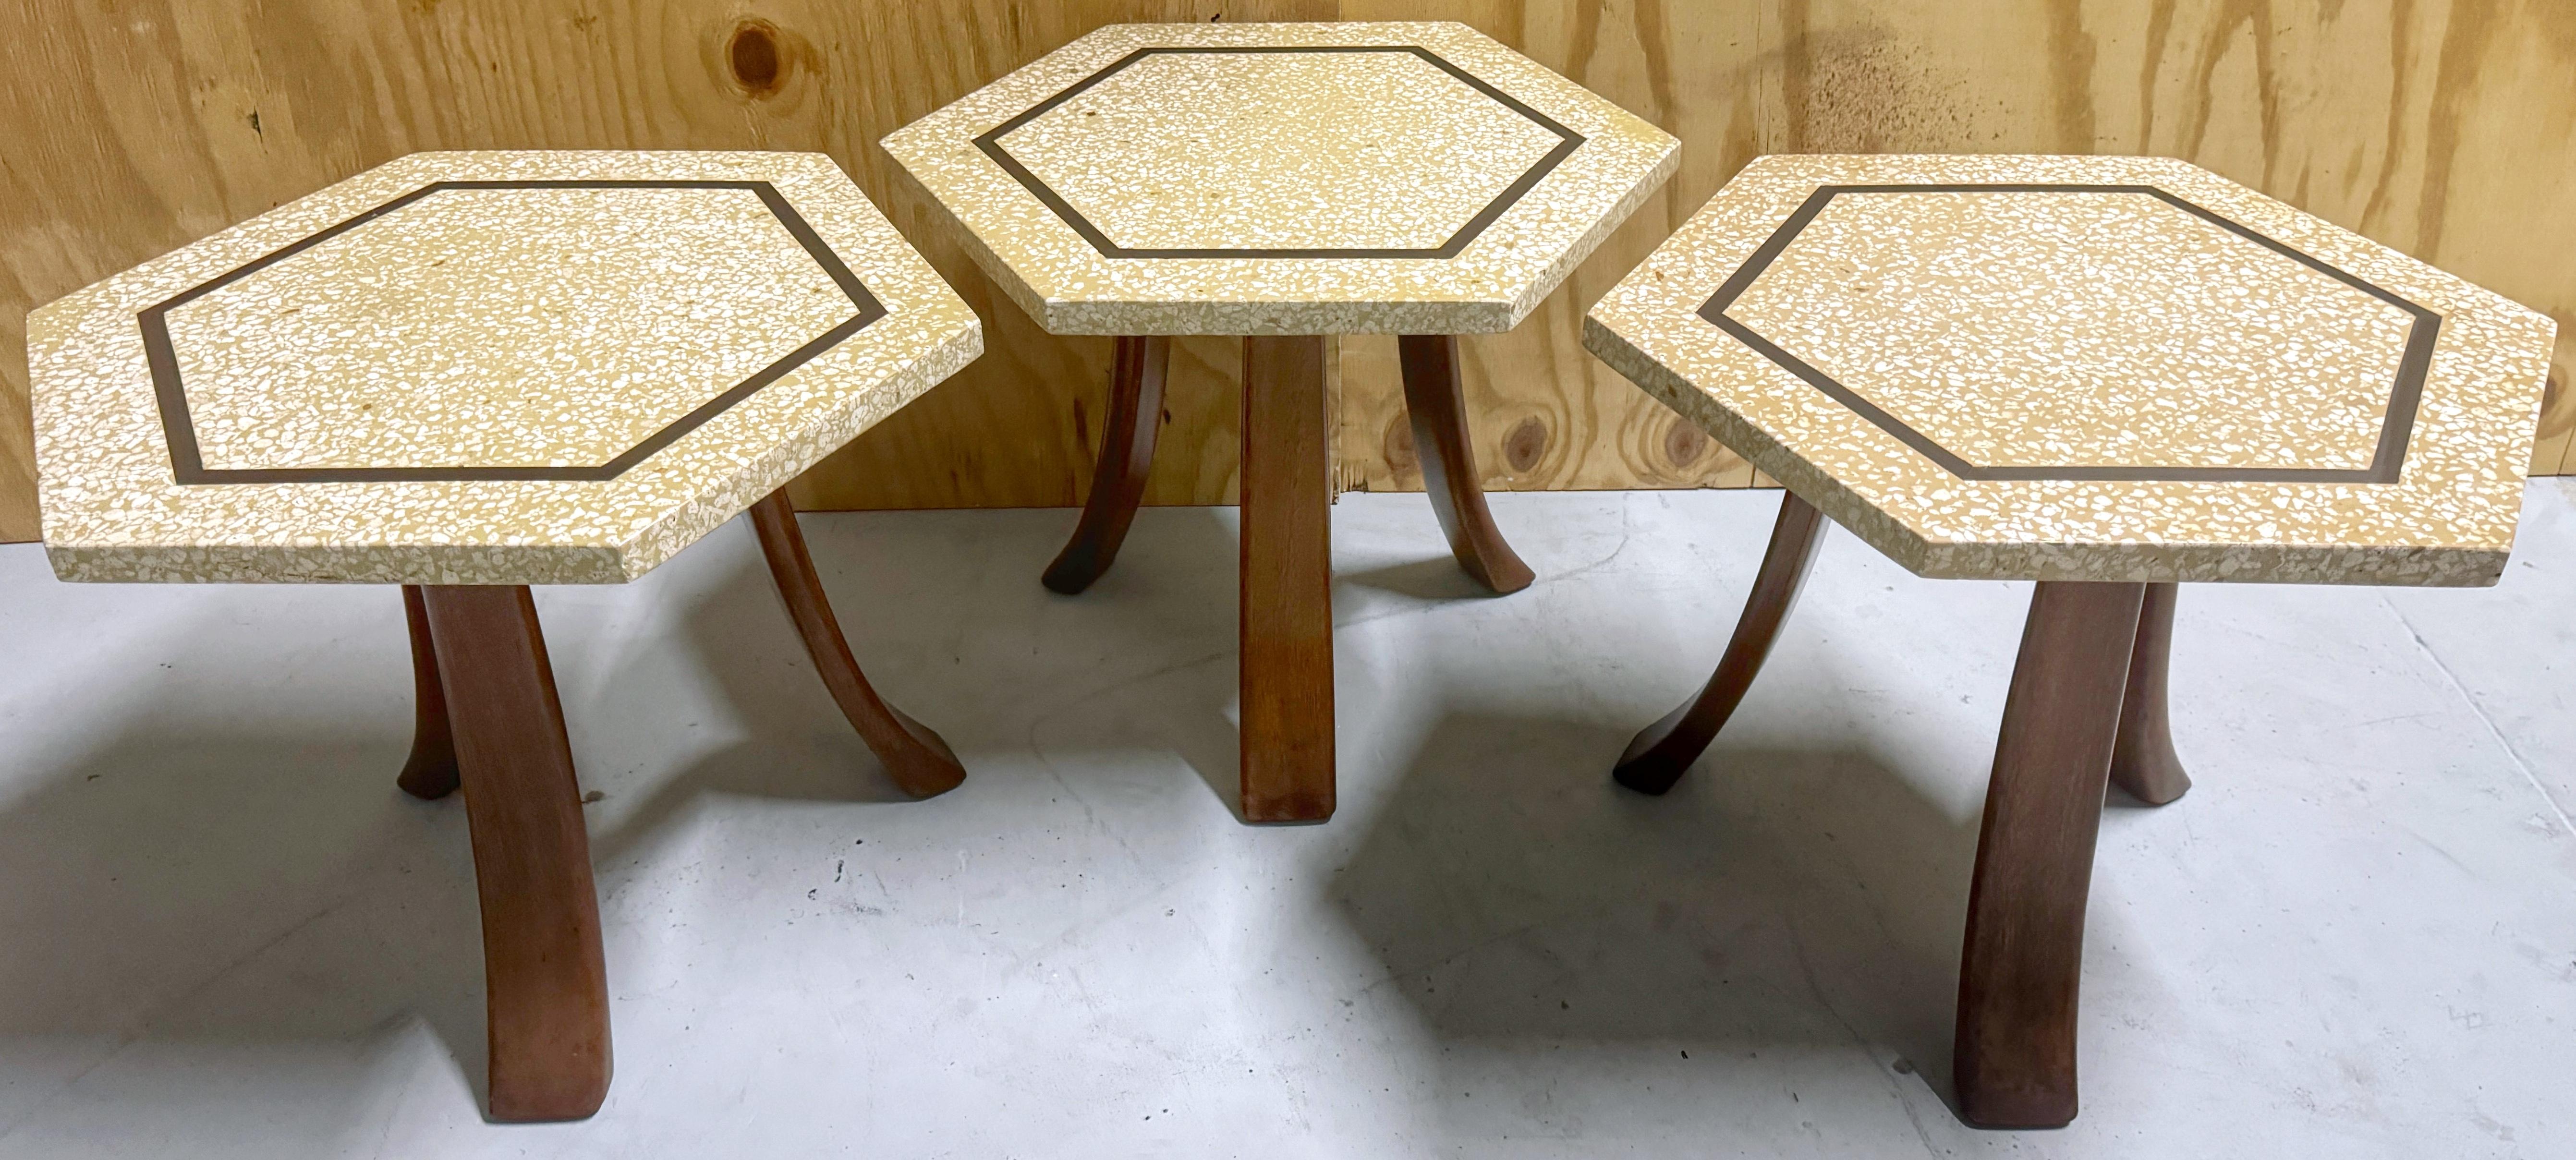 3 Harvey Probber Terrazzo & Bronze Inlay Hexagonal Side Tables Sold Individually
Designed by Harvey Probber (1922-2003) USA, Circa 1950s

We are pleased to offer three period Harvey Probber terrazzo & bronze inlay hexagonal side tables, available